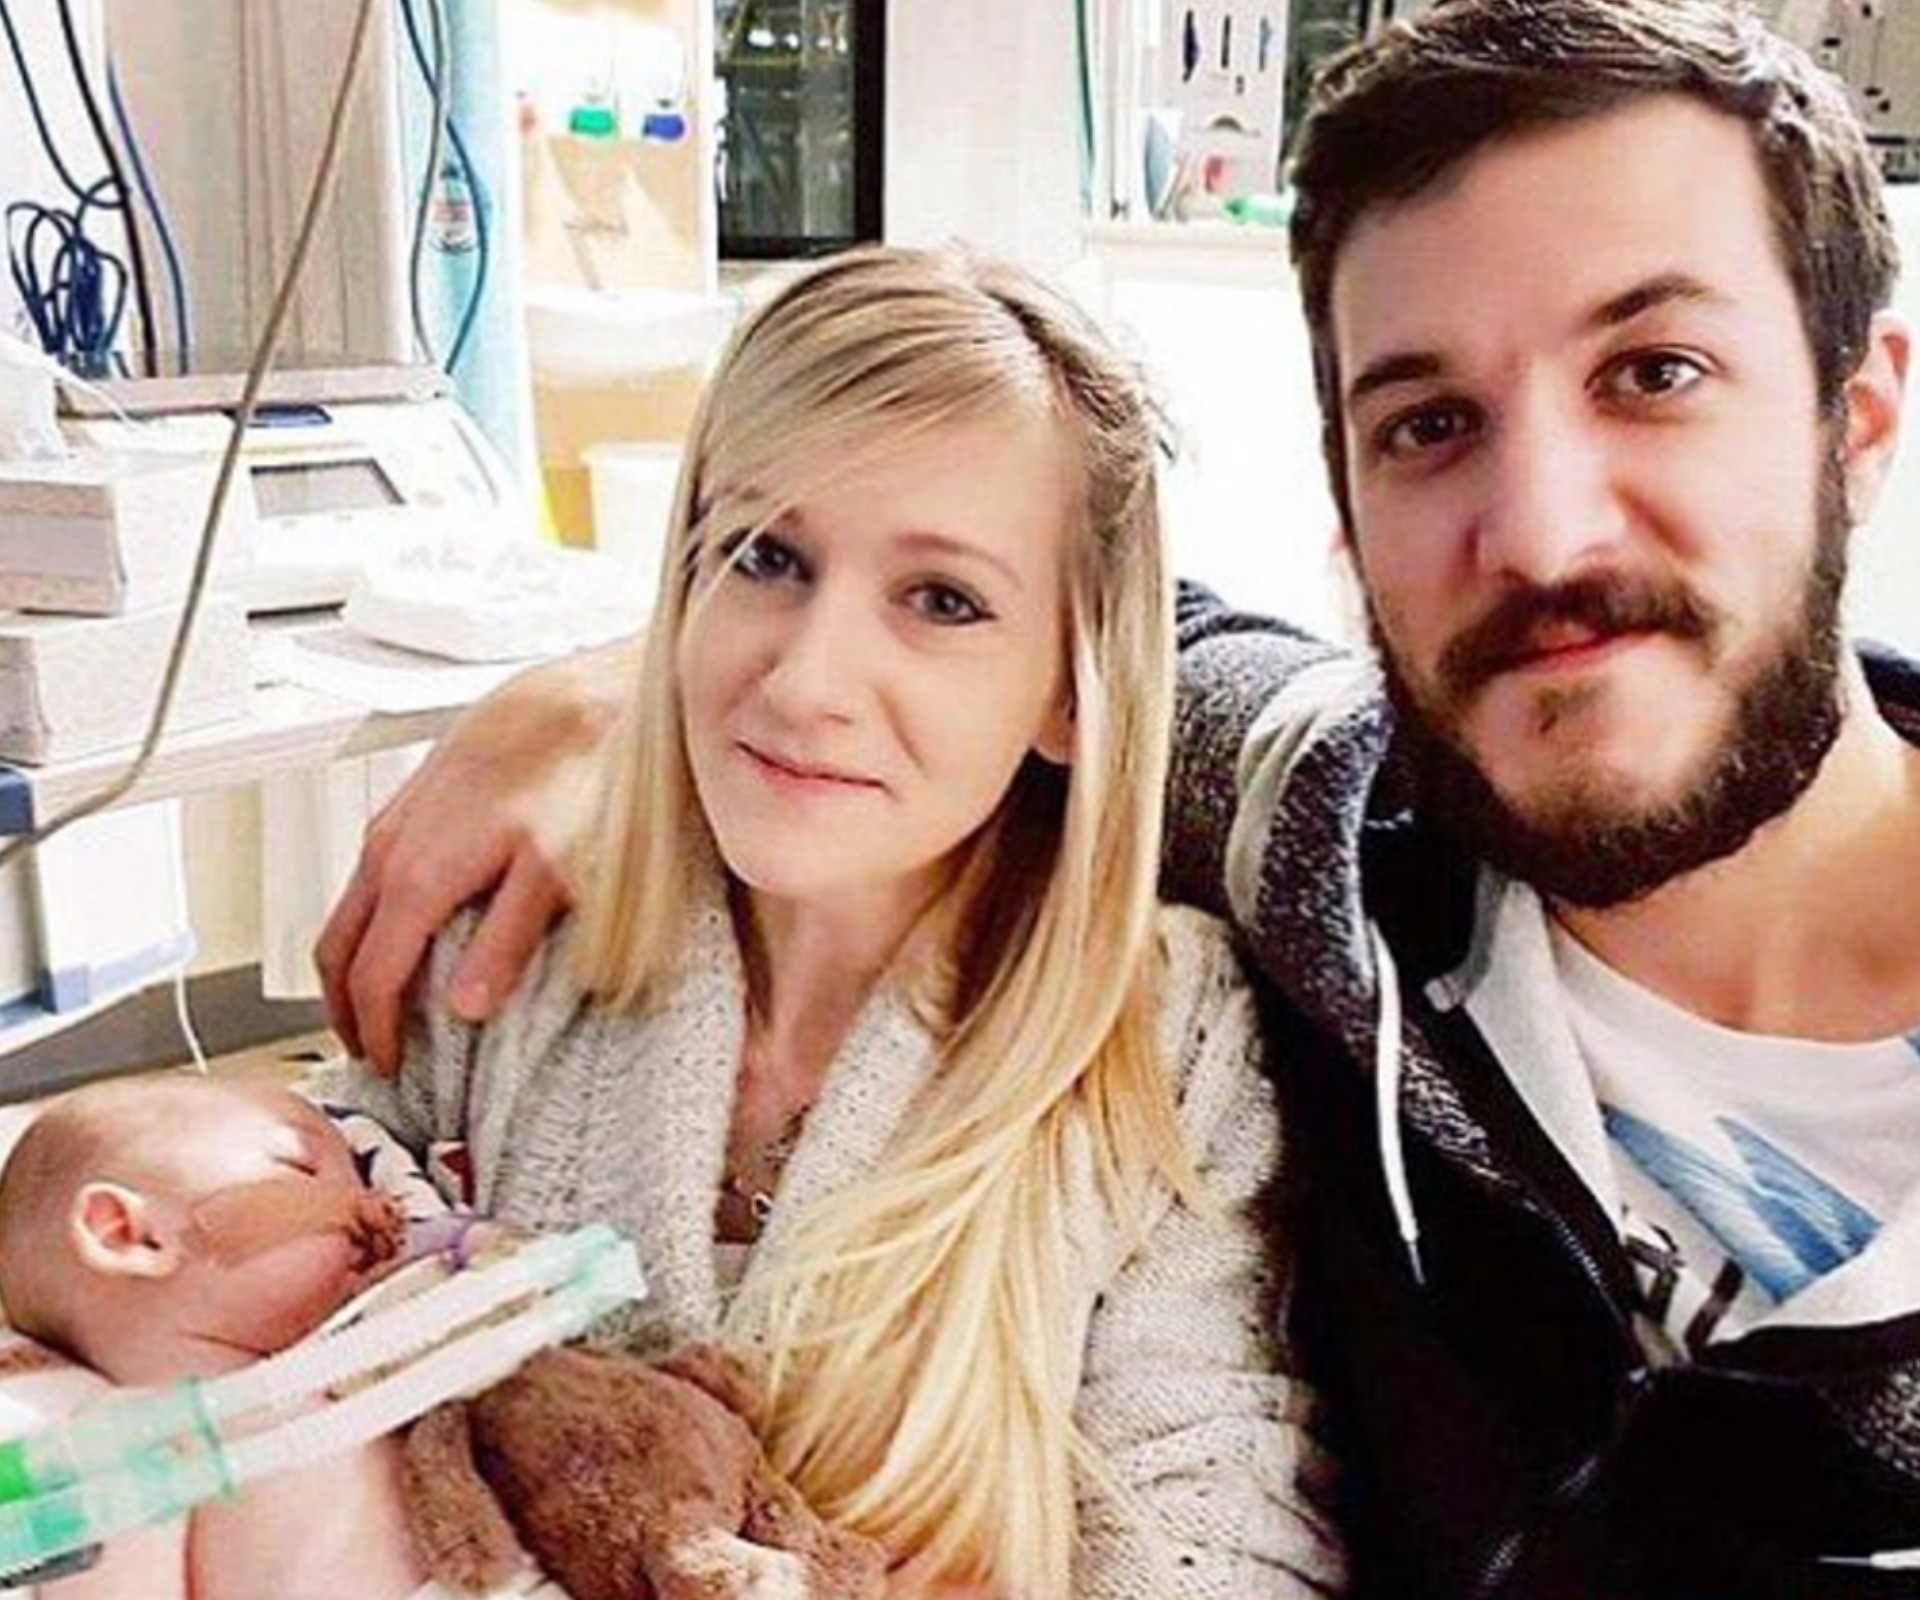 EXCLUSIVE: Charlie Gard's mother Connie speaks to Take 5